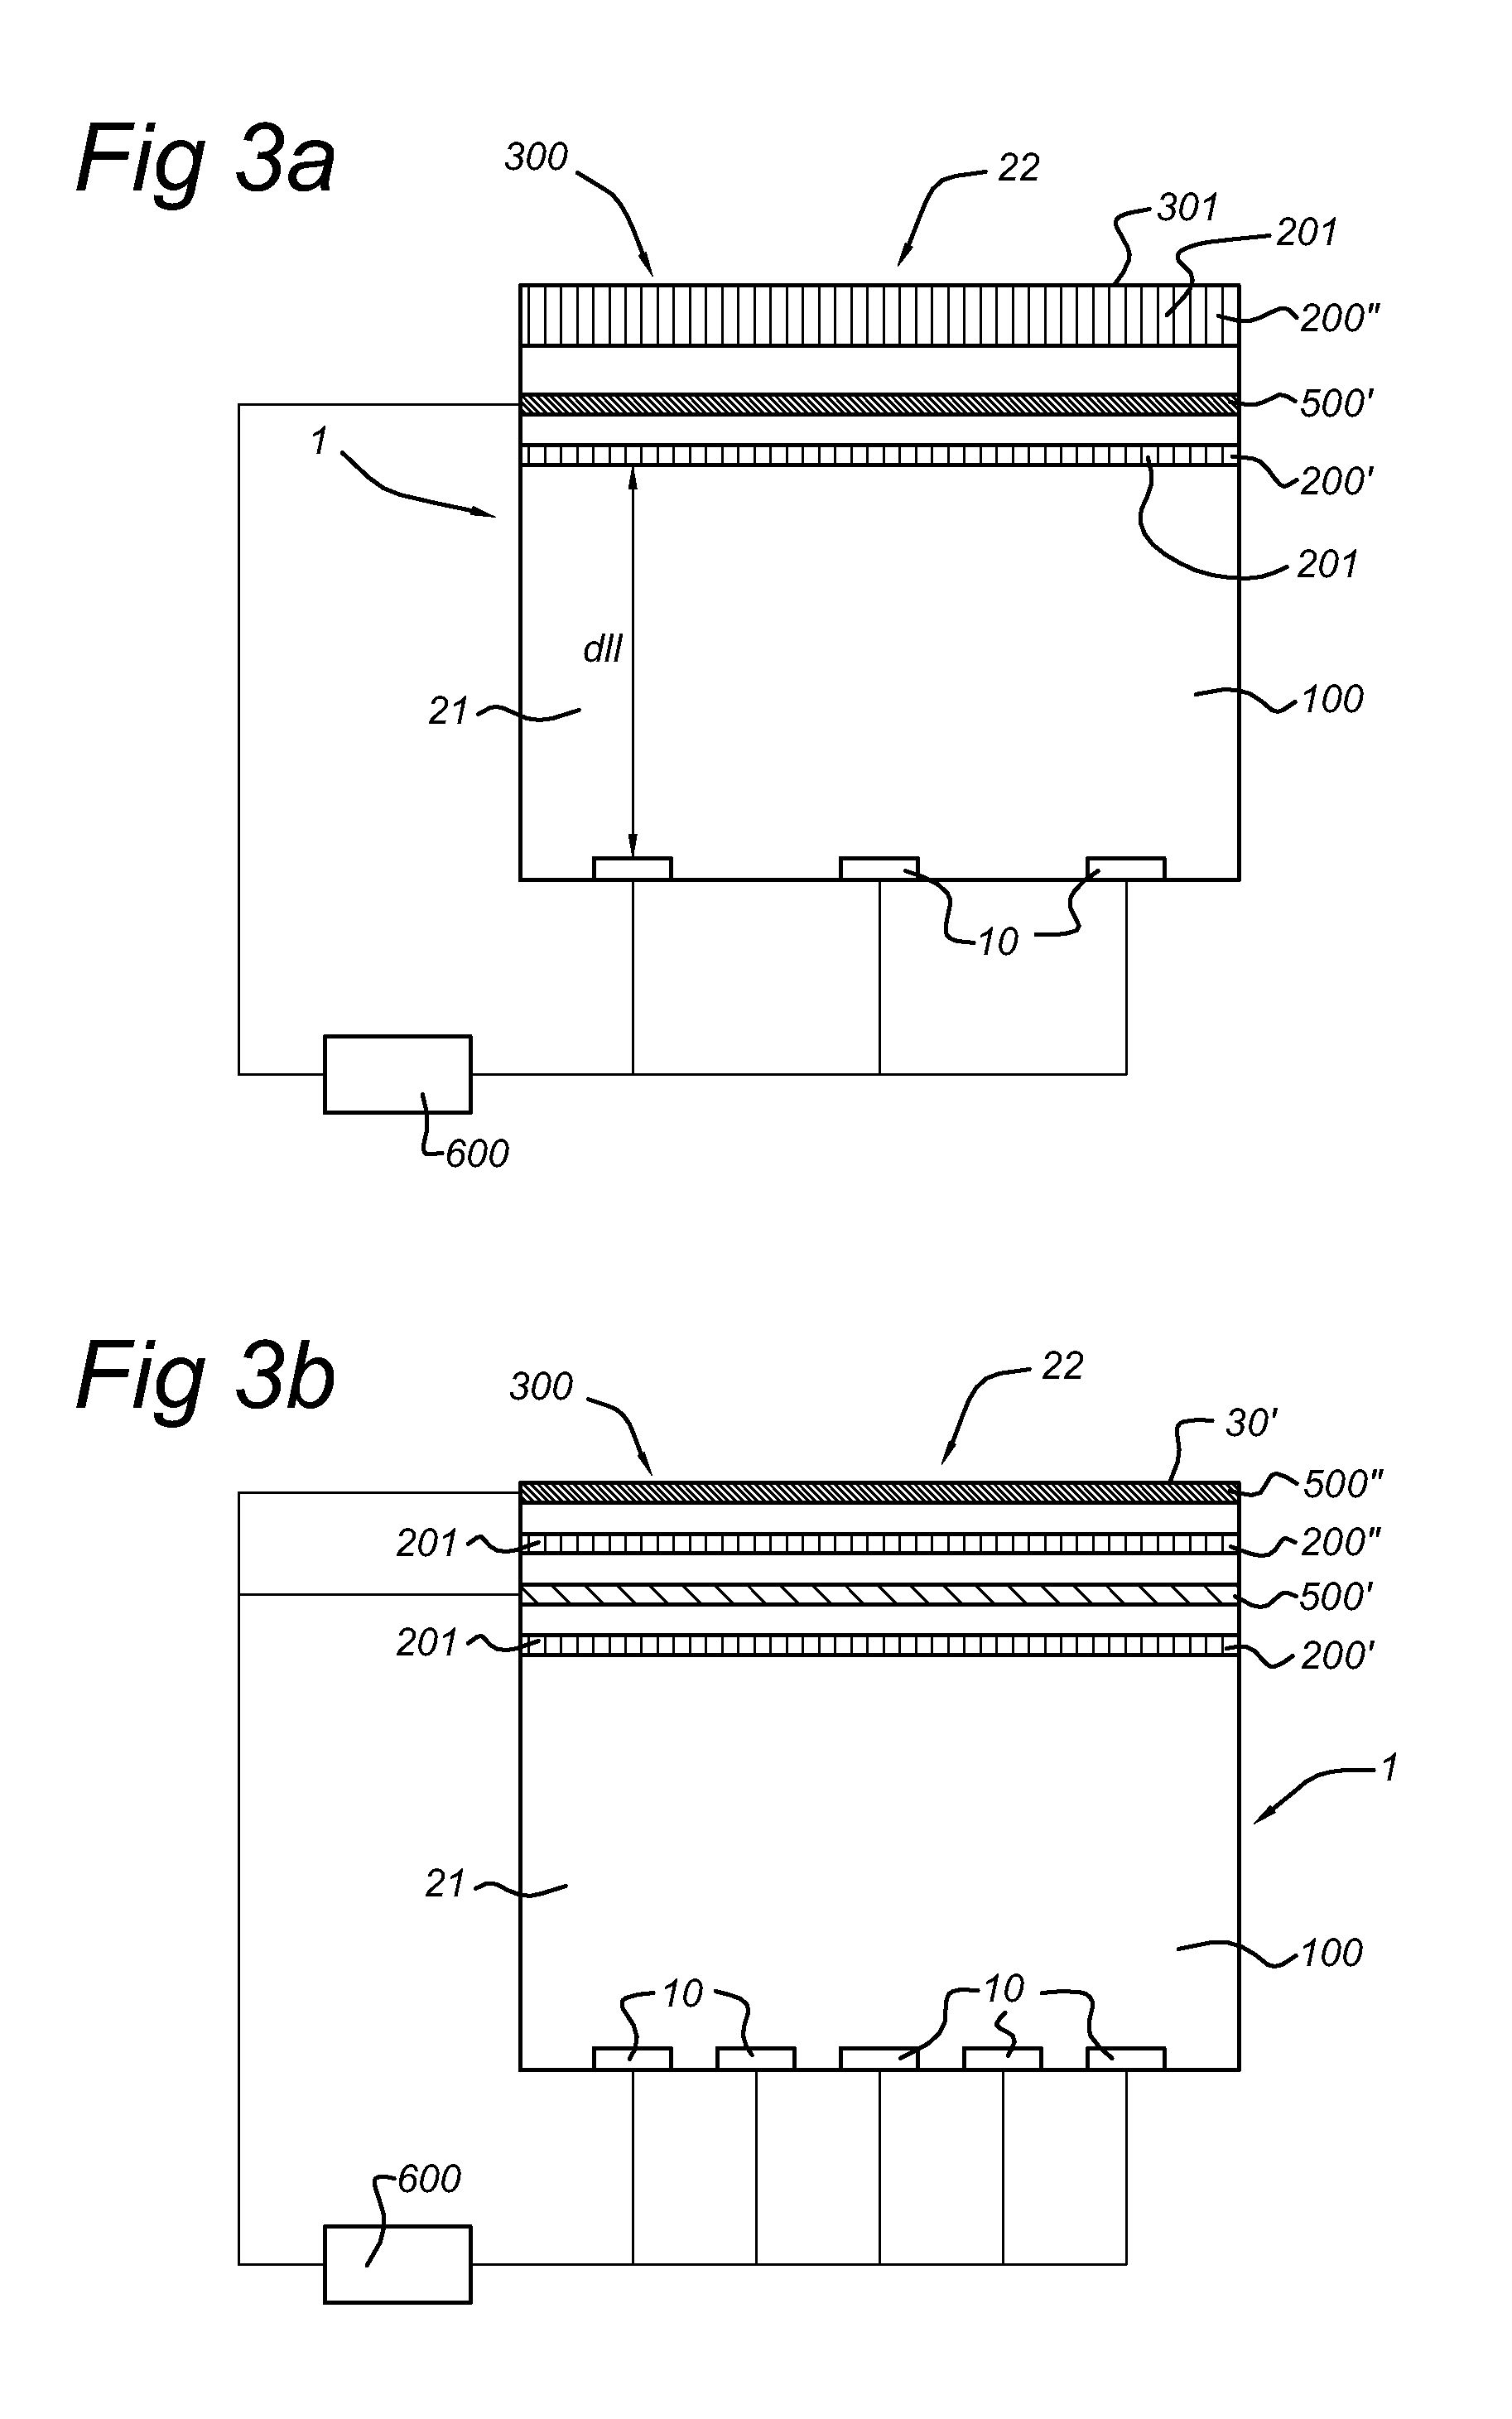 Illumination device with electrical variable scattering element